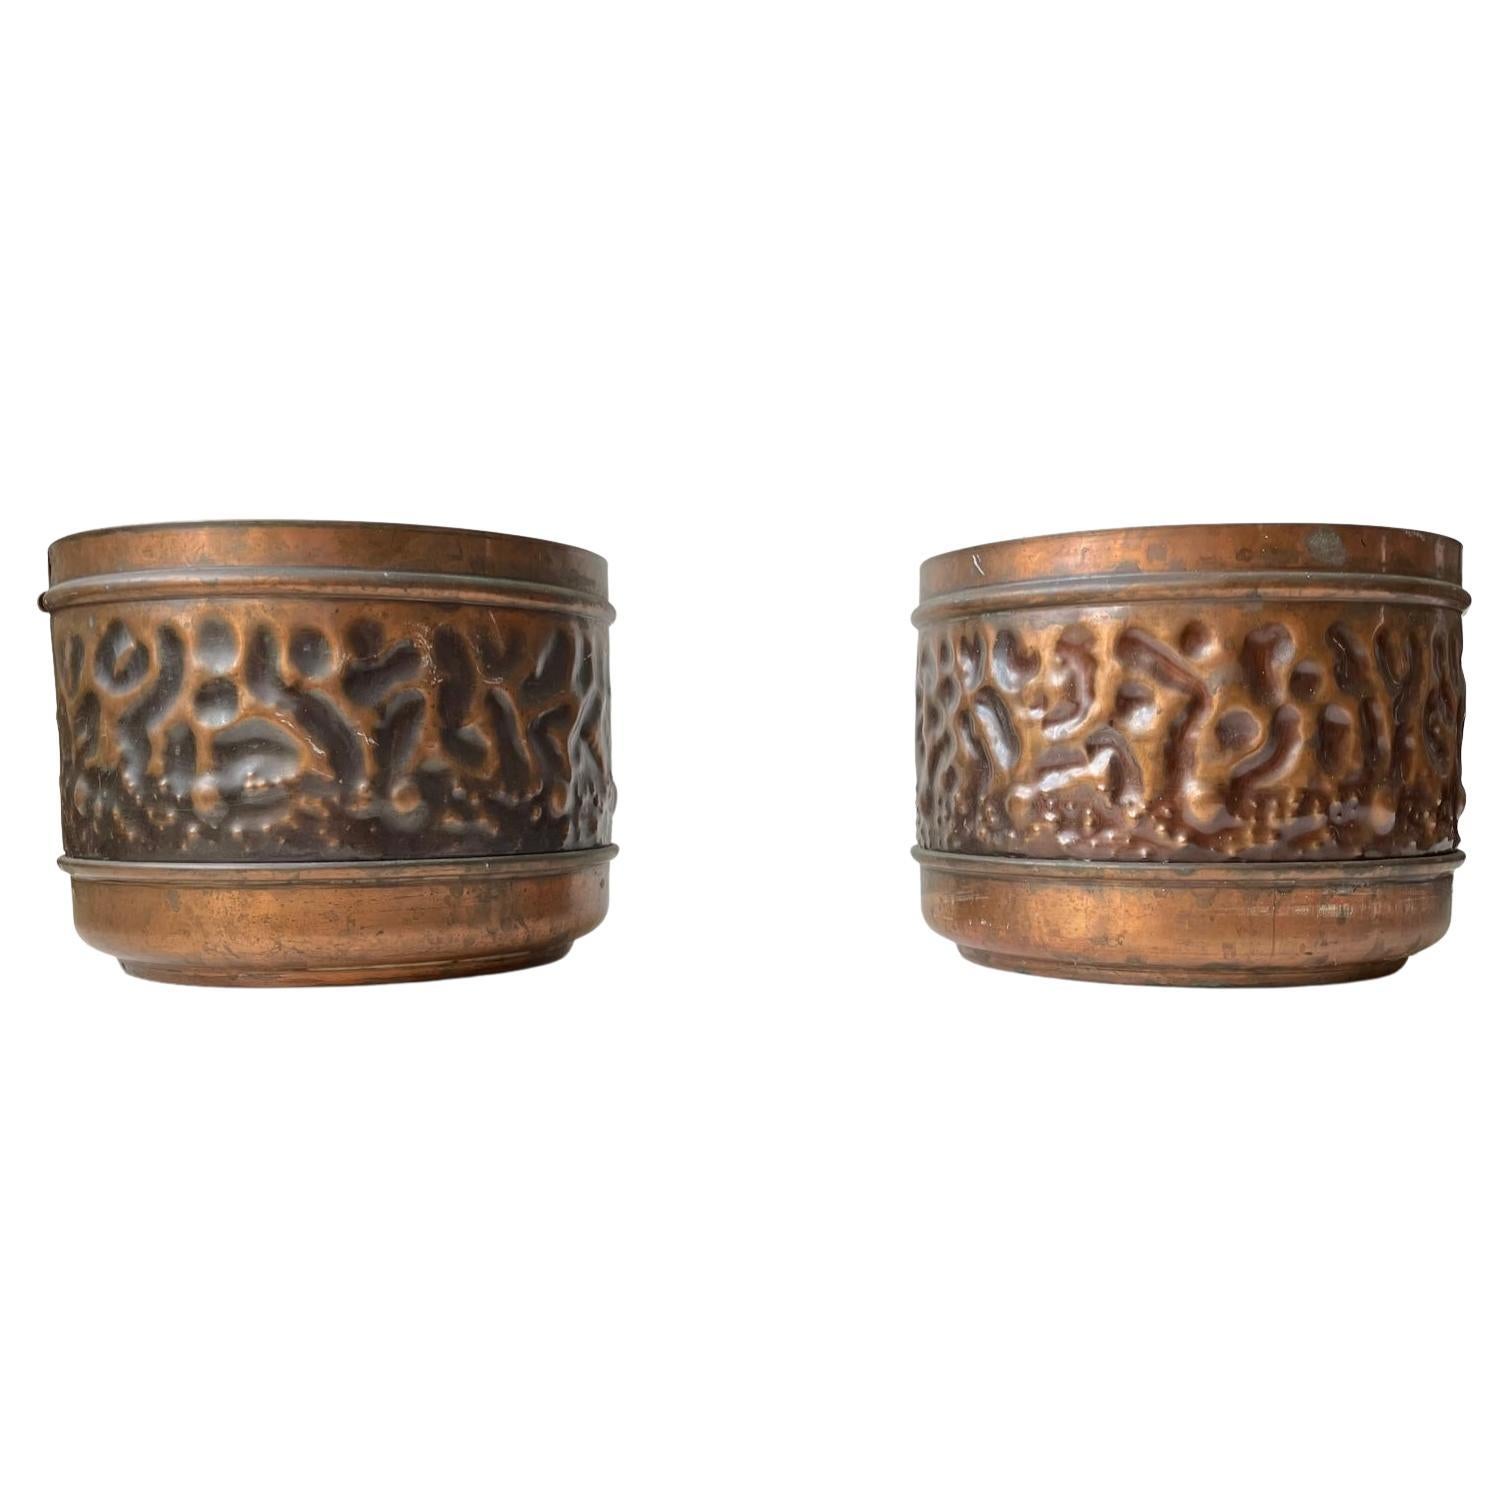 Vintage Brutalist Planters in Copper from Sandnes Norway, 1970s